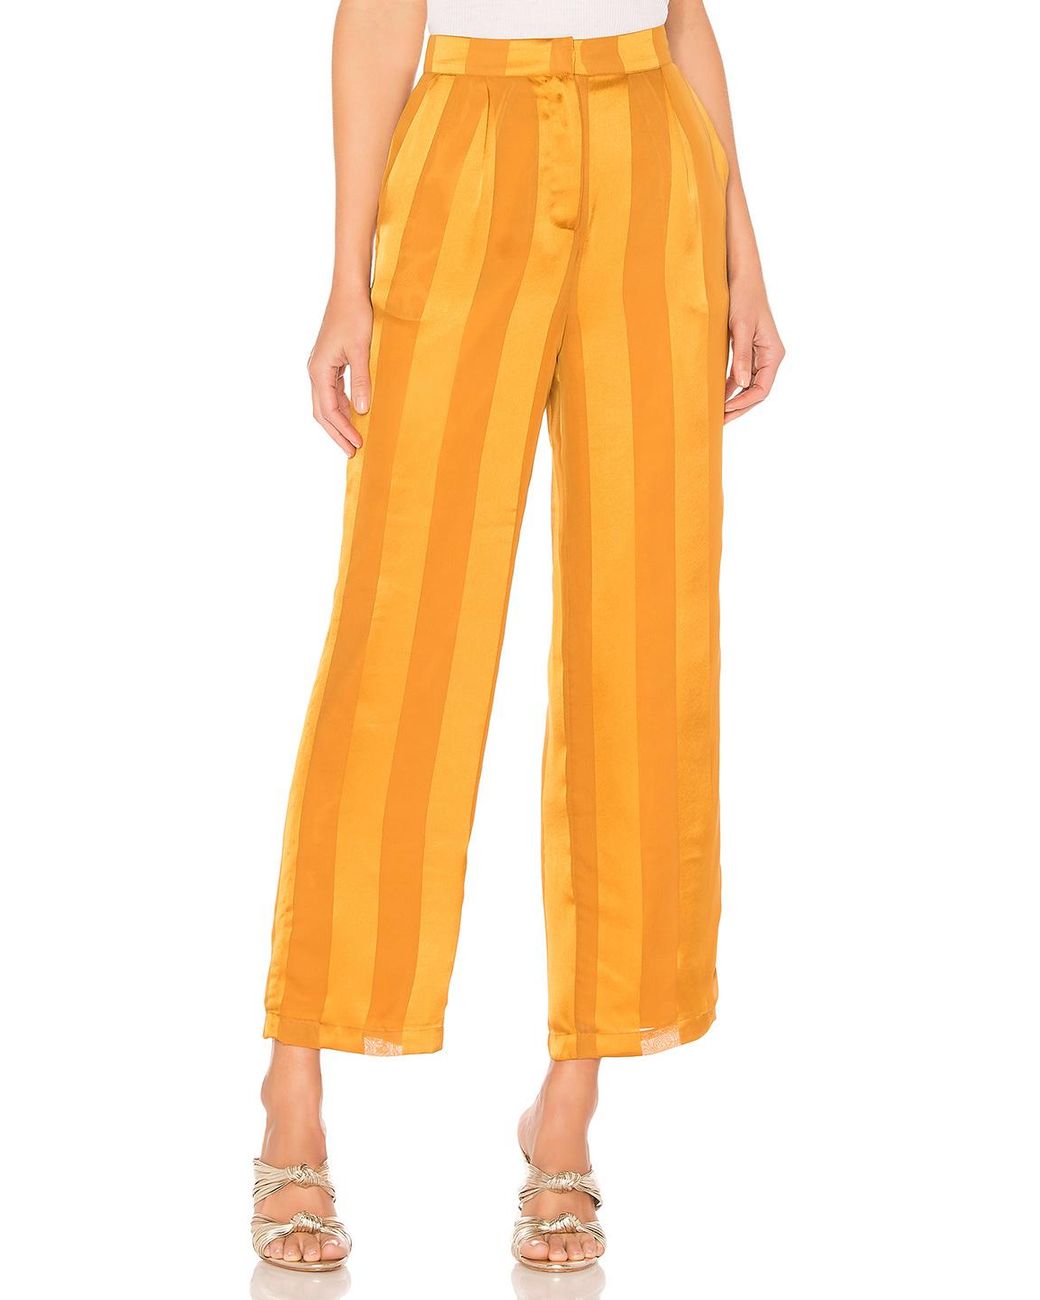 House of Harlow 1960 Synthetic X Revolve Alessia Pant in Orange - Lyst